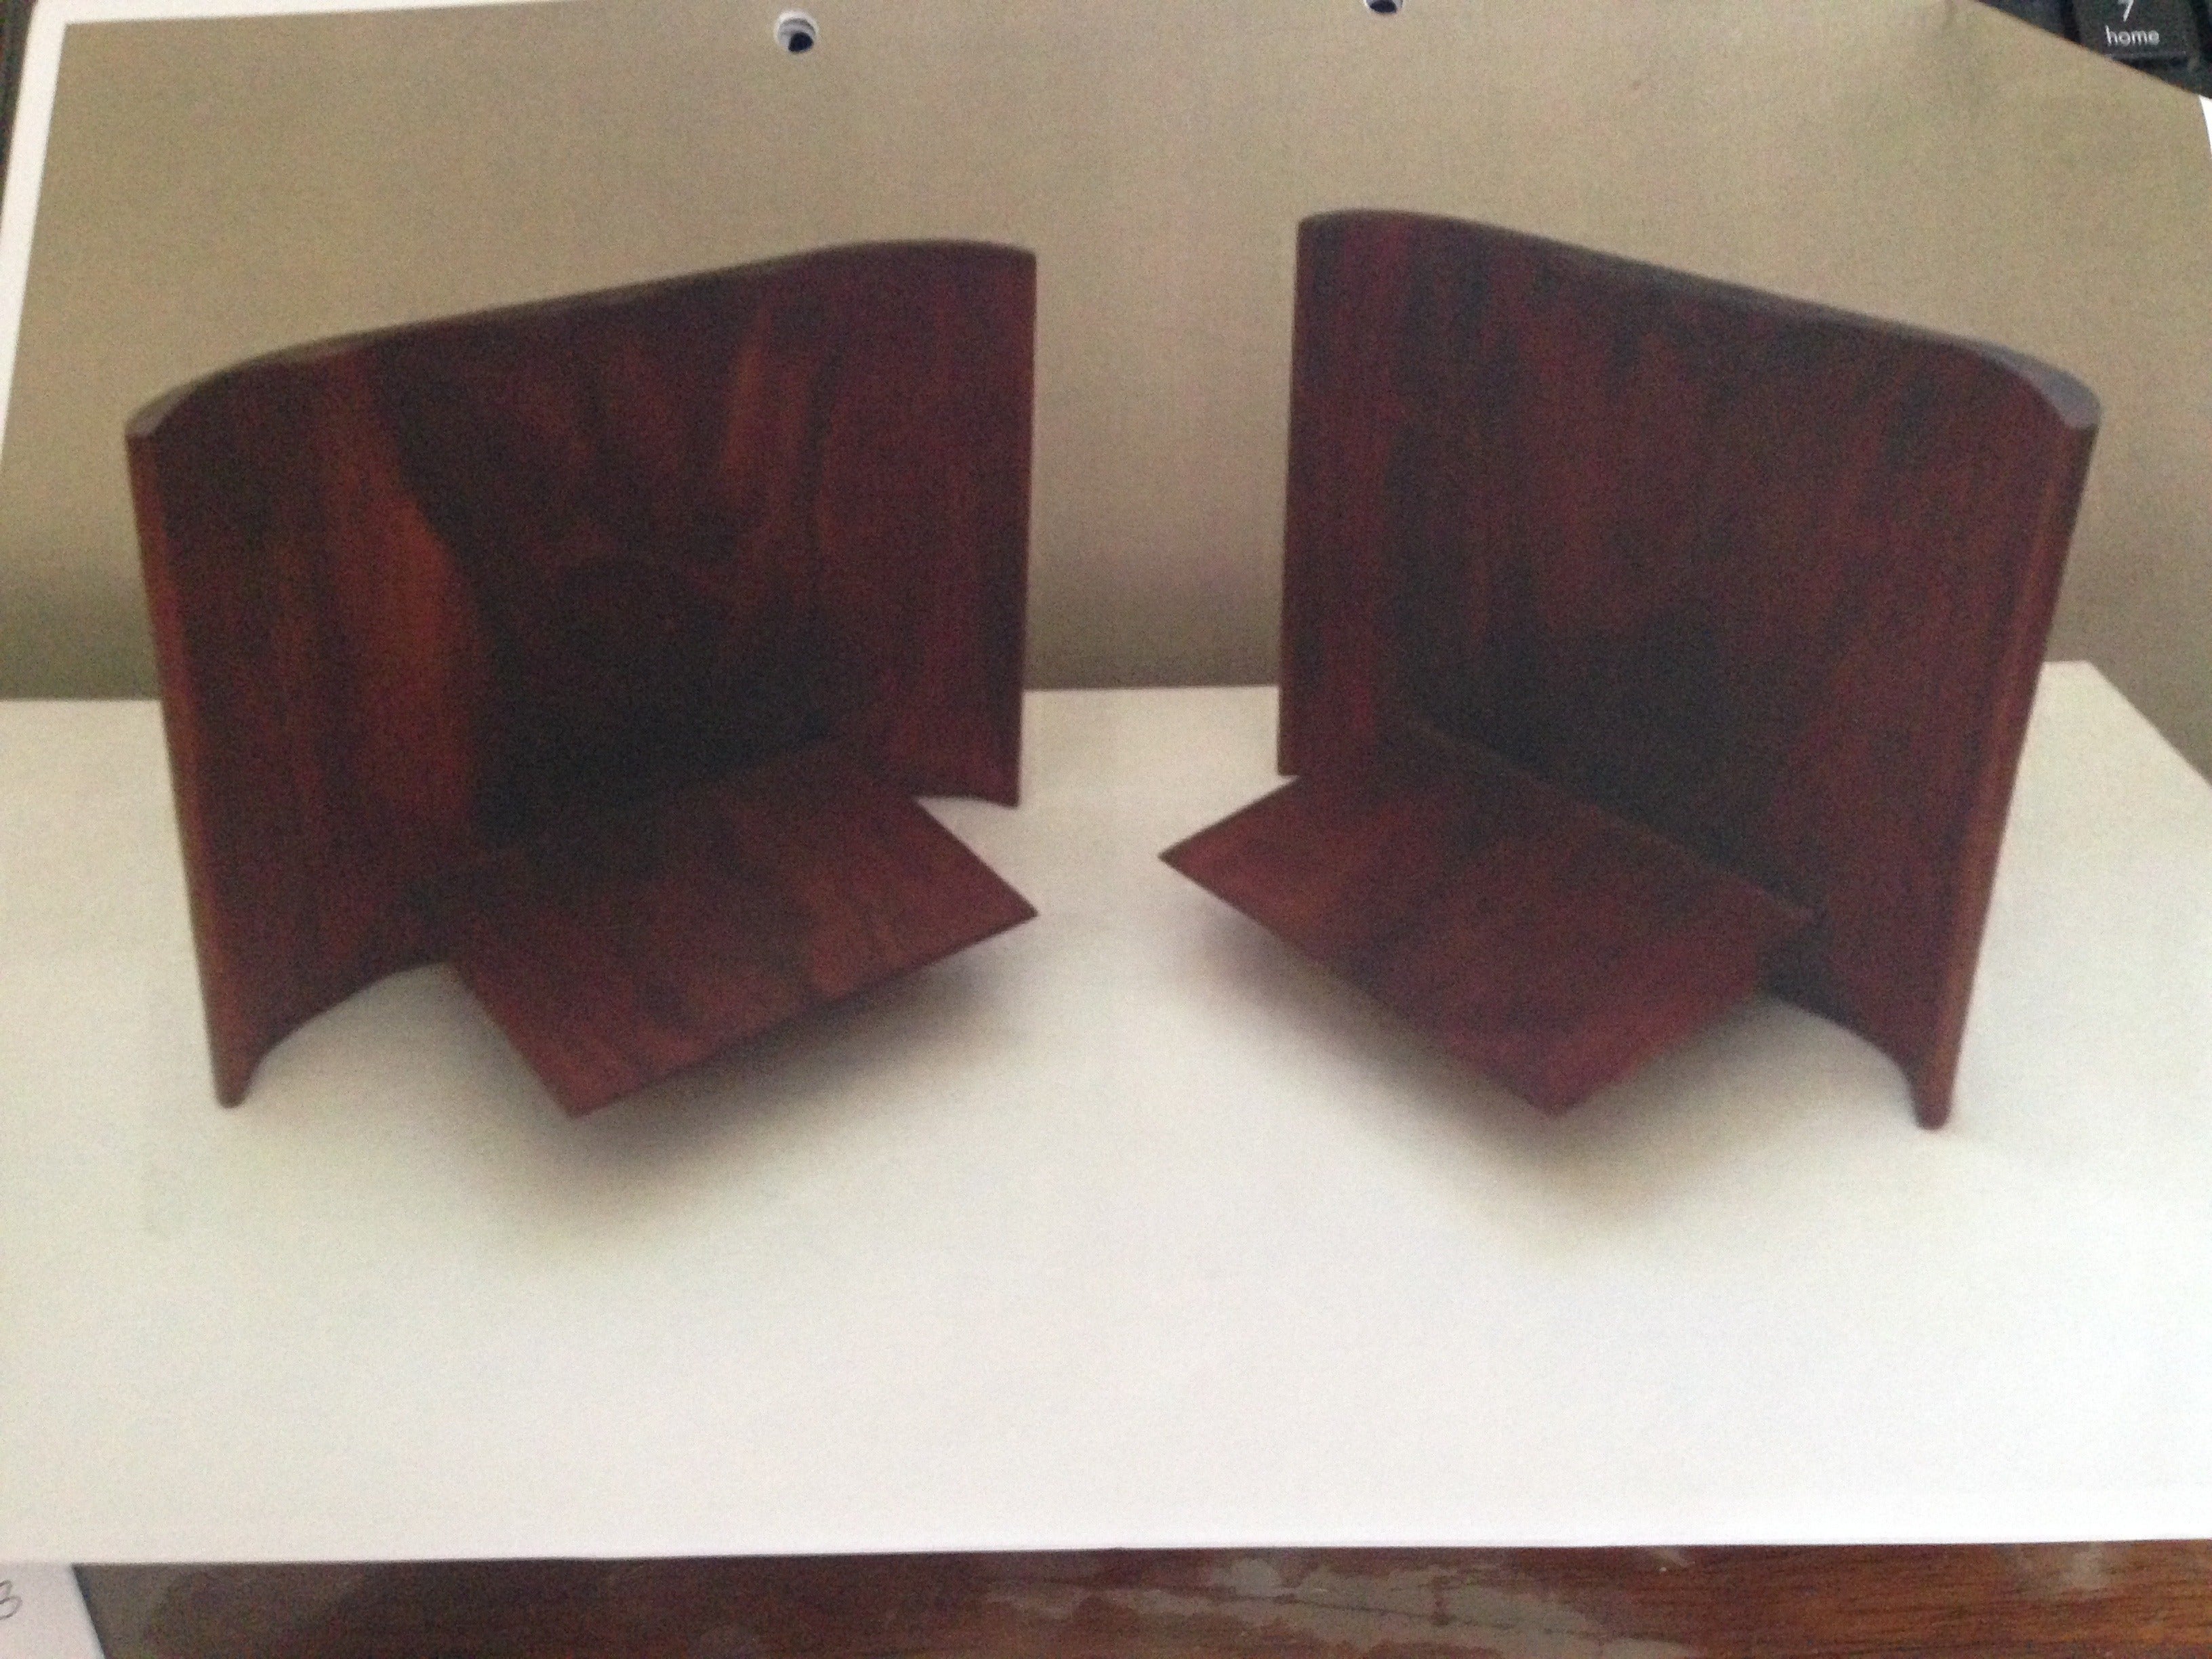 Pair of Sculptural Wooden Wall Shelves by Roger Sloan For Sale